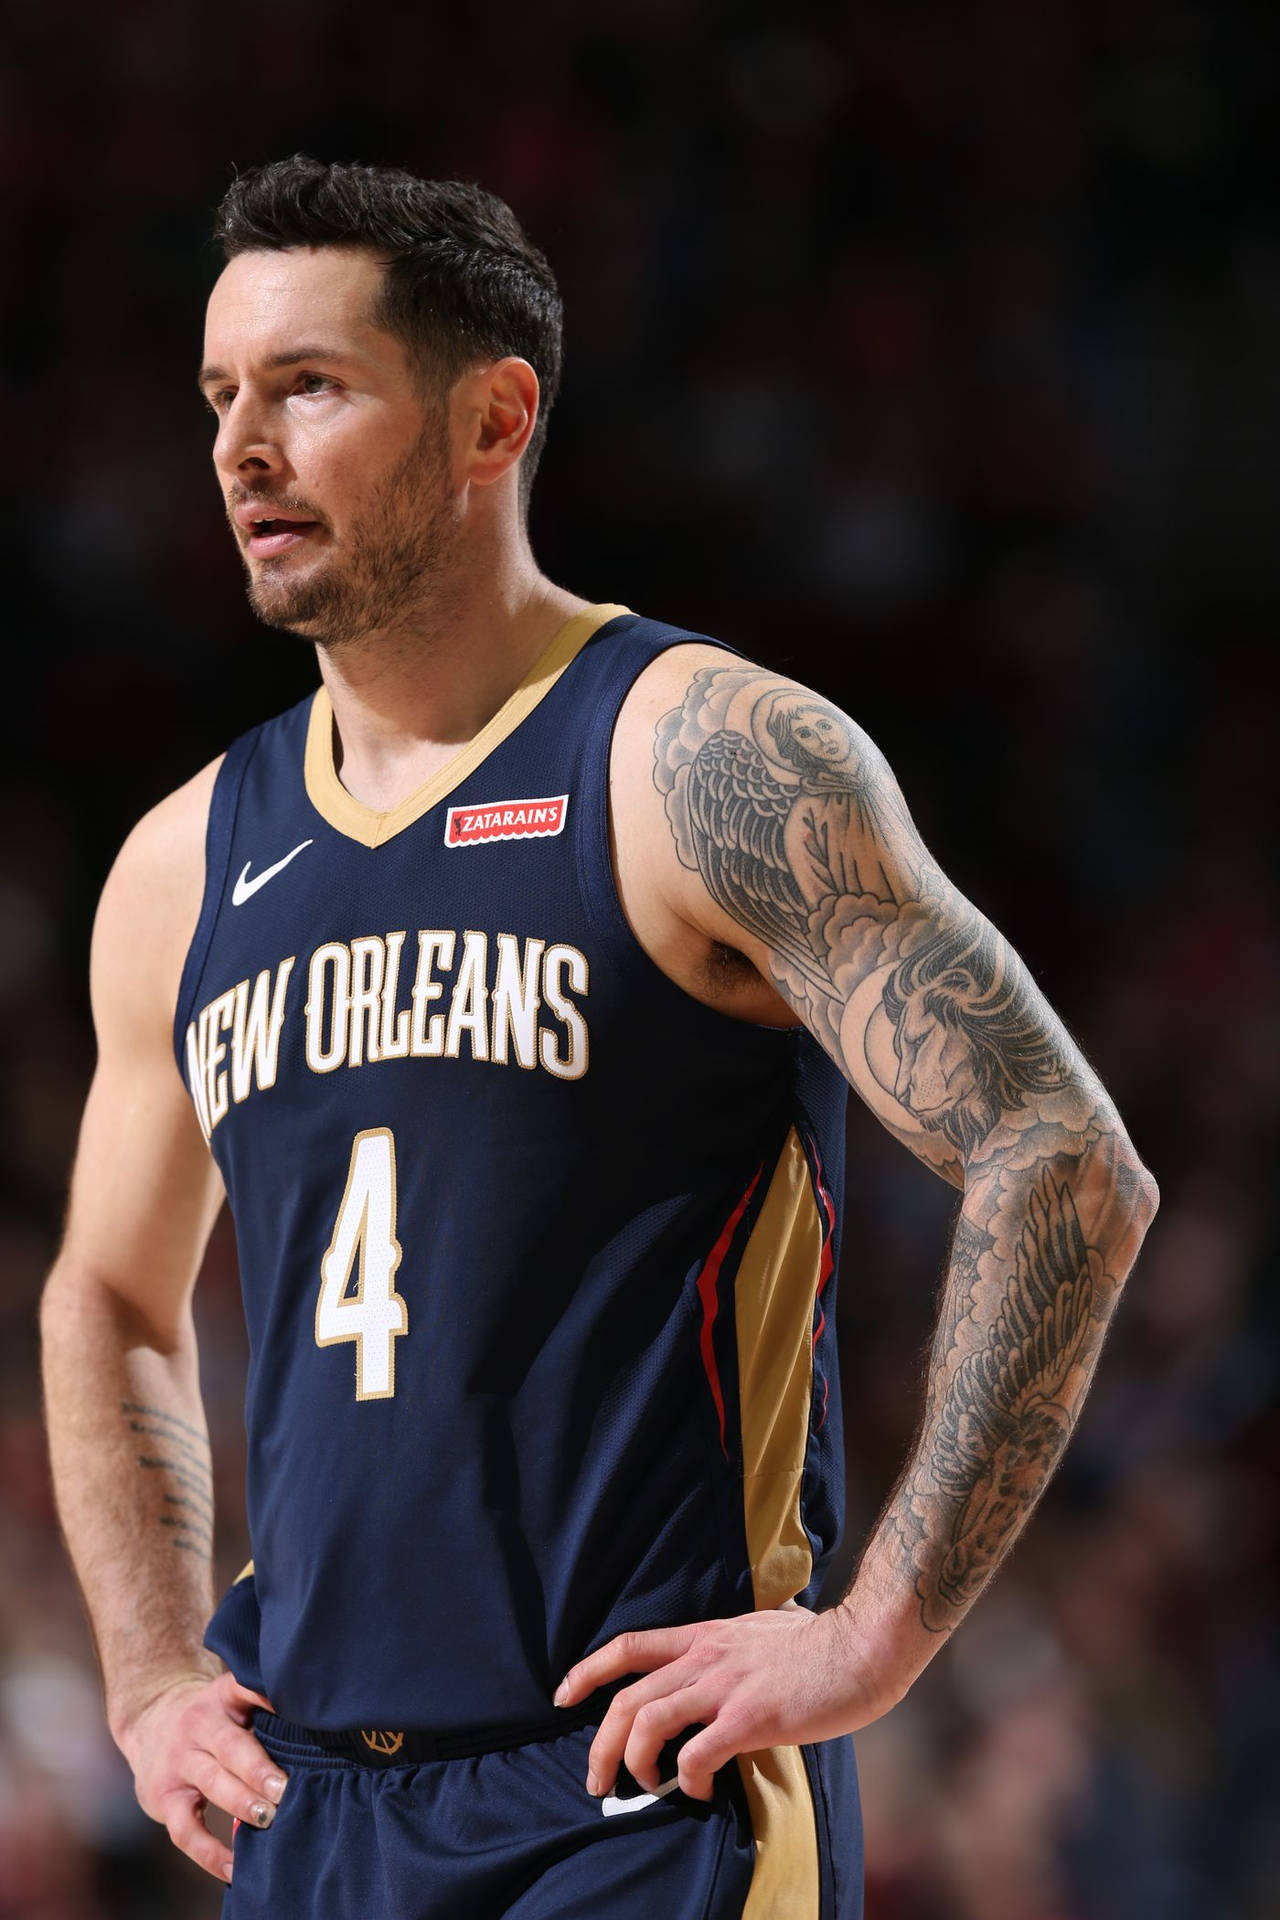 Jj Redick In Blue Jersey No. 4 Background